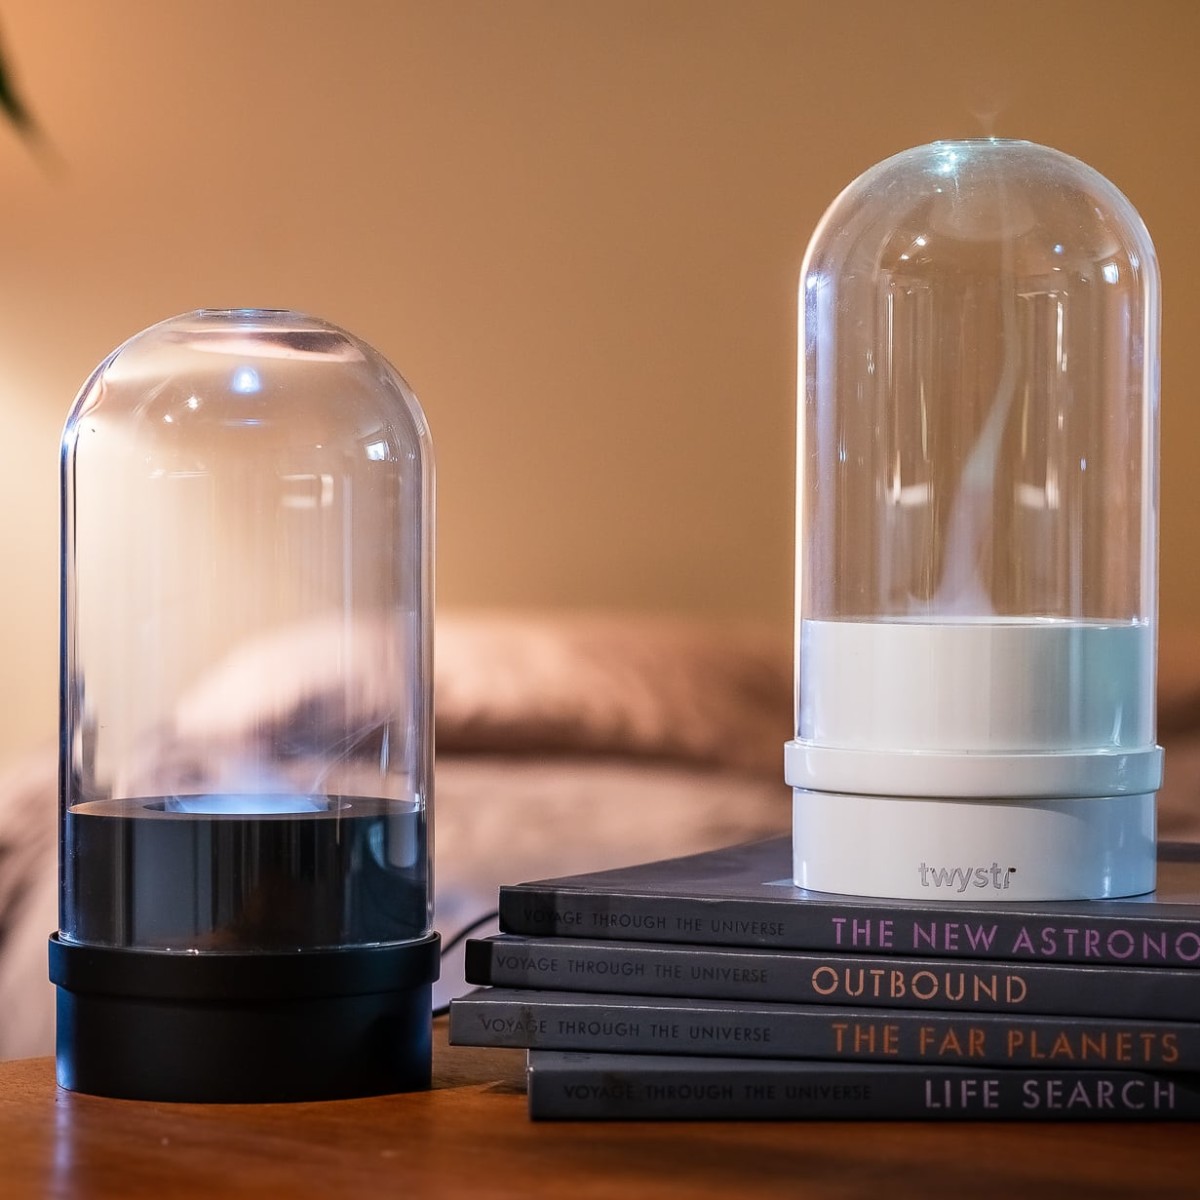 TWYSTR Tornado Diffuser offers function in an artistic container to enhance your senses